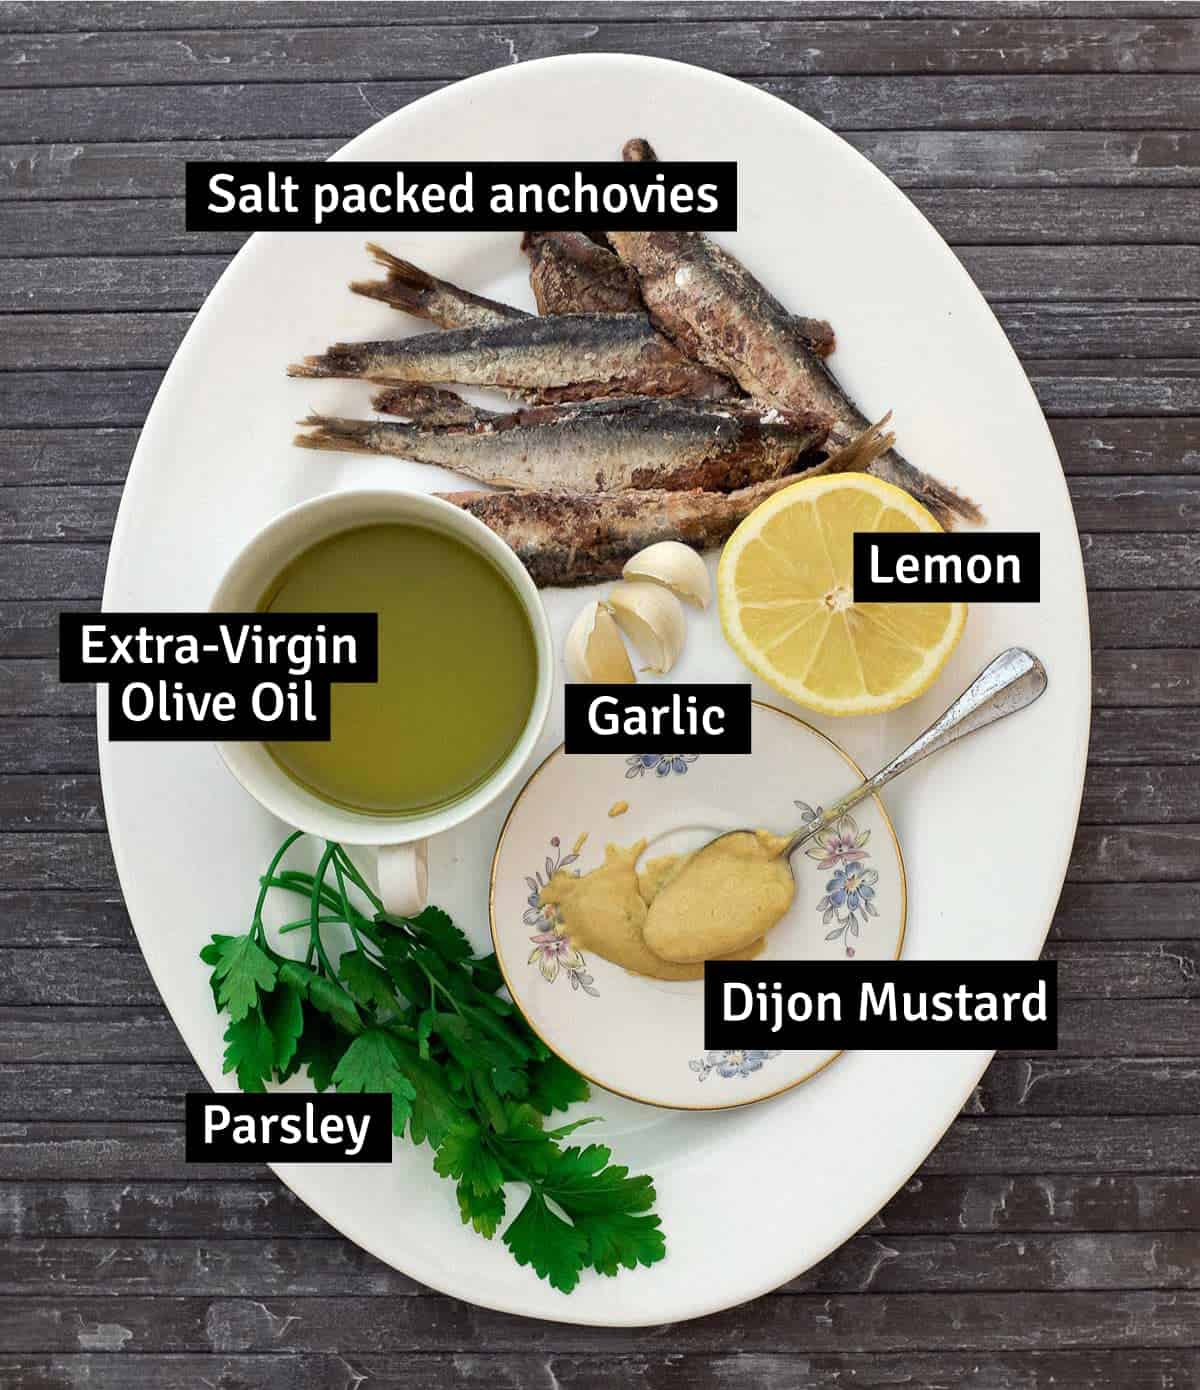 The Ingredients for Anchovy sauce on a large platter: Anchovies, Lemon, Dijon mustard, garlic, extra-virgin olive oil and parsley.